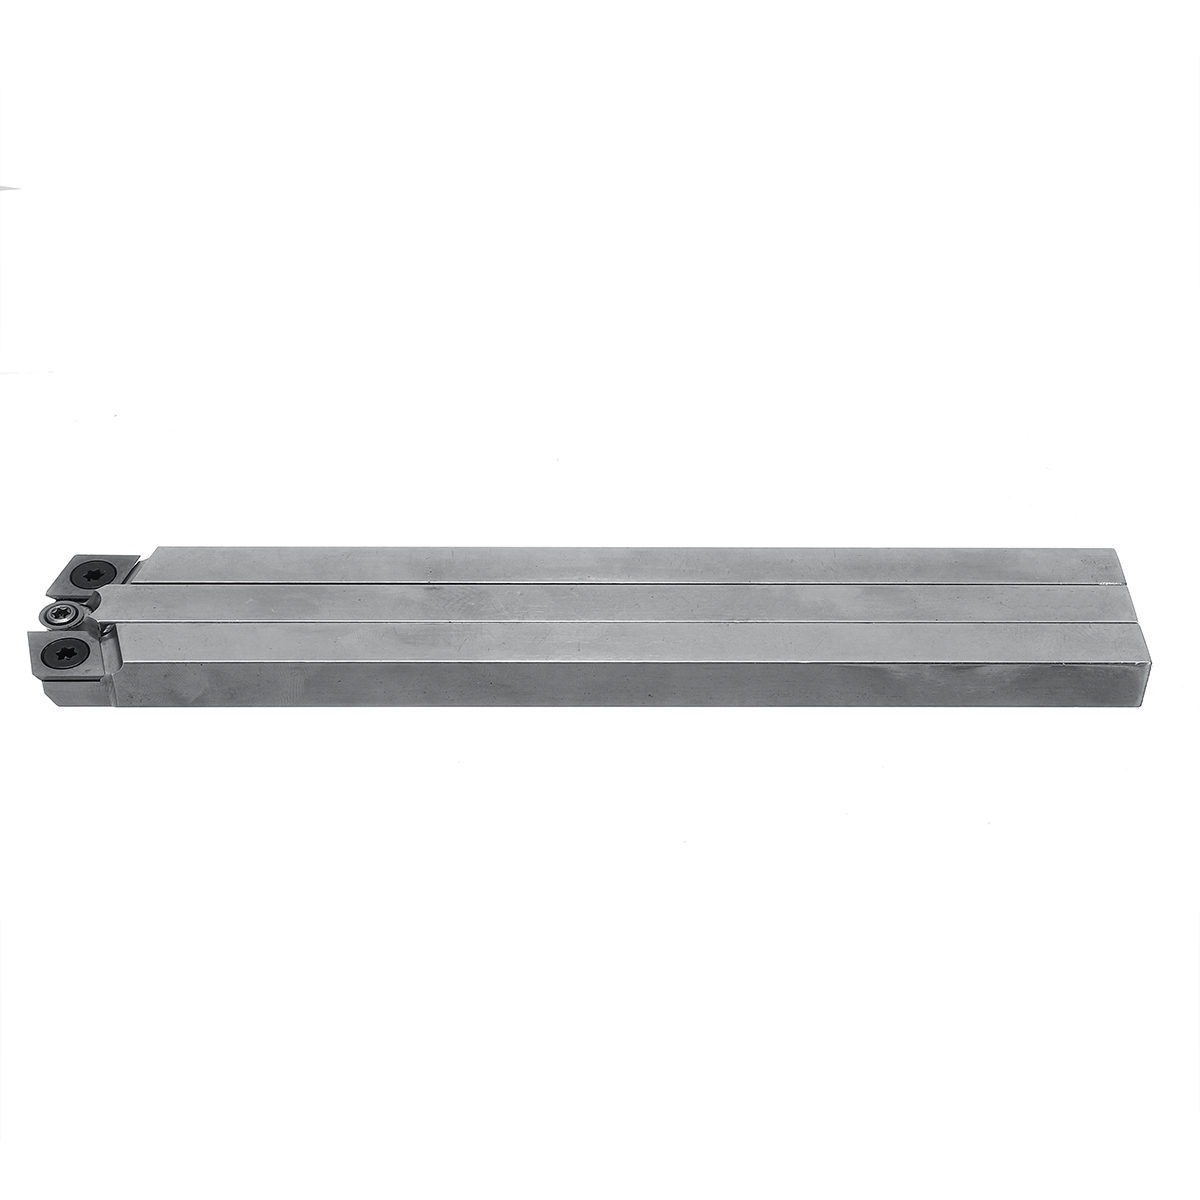 Skew-Wood-Turning-Tool-With-Wood-Carbide-Insert-Cutter-Square-Shank-Woodworking-Tool-1460977-6